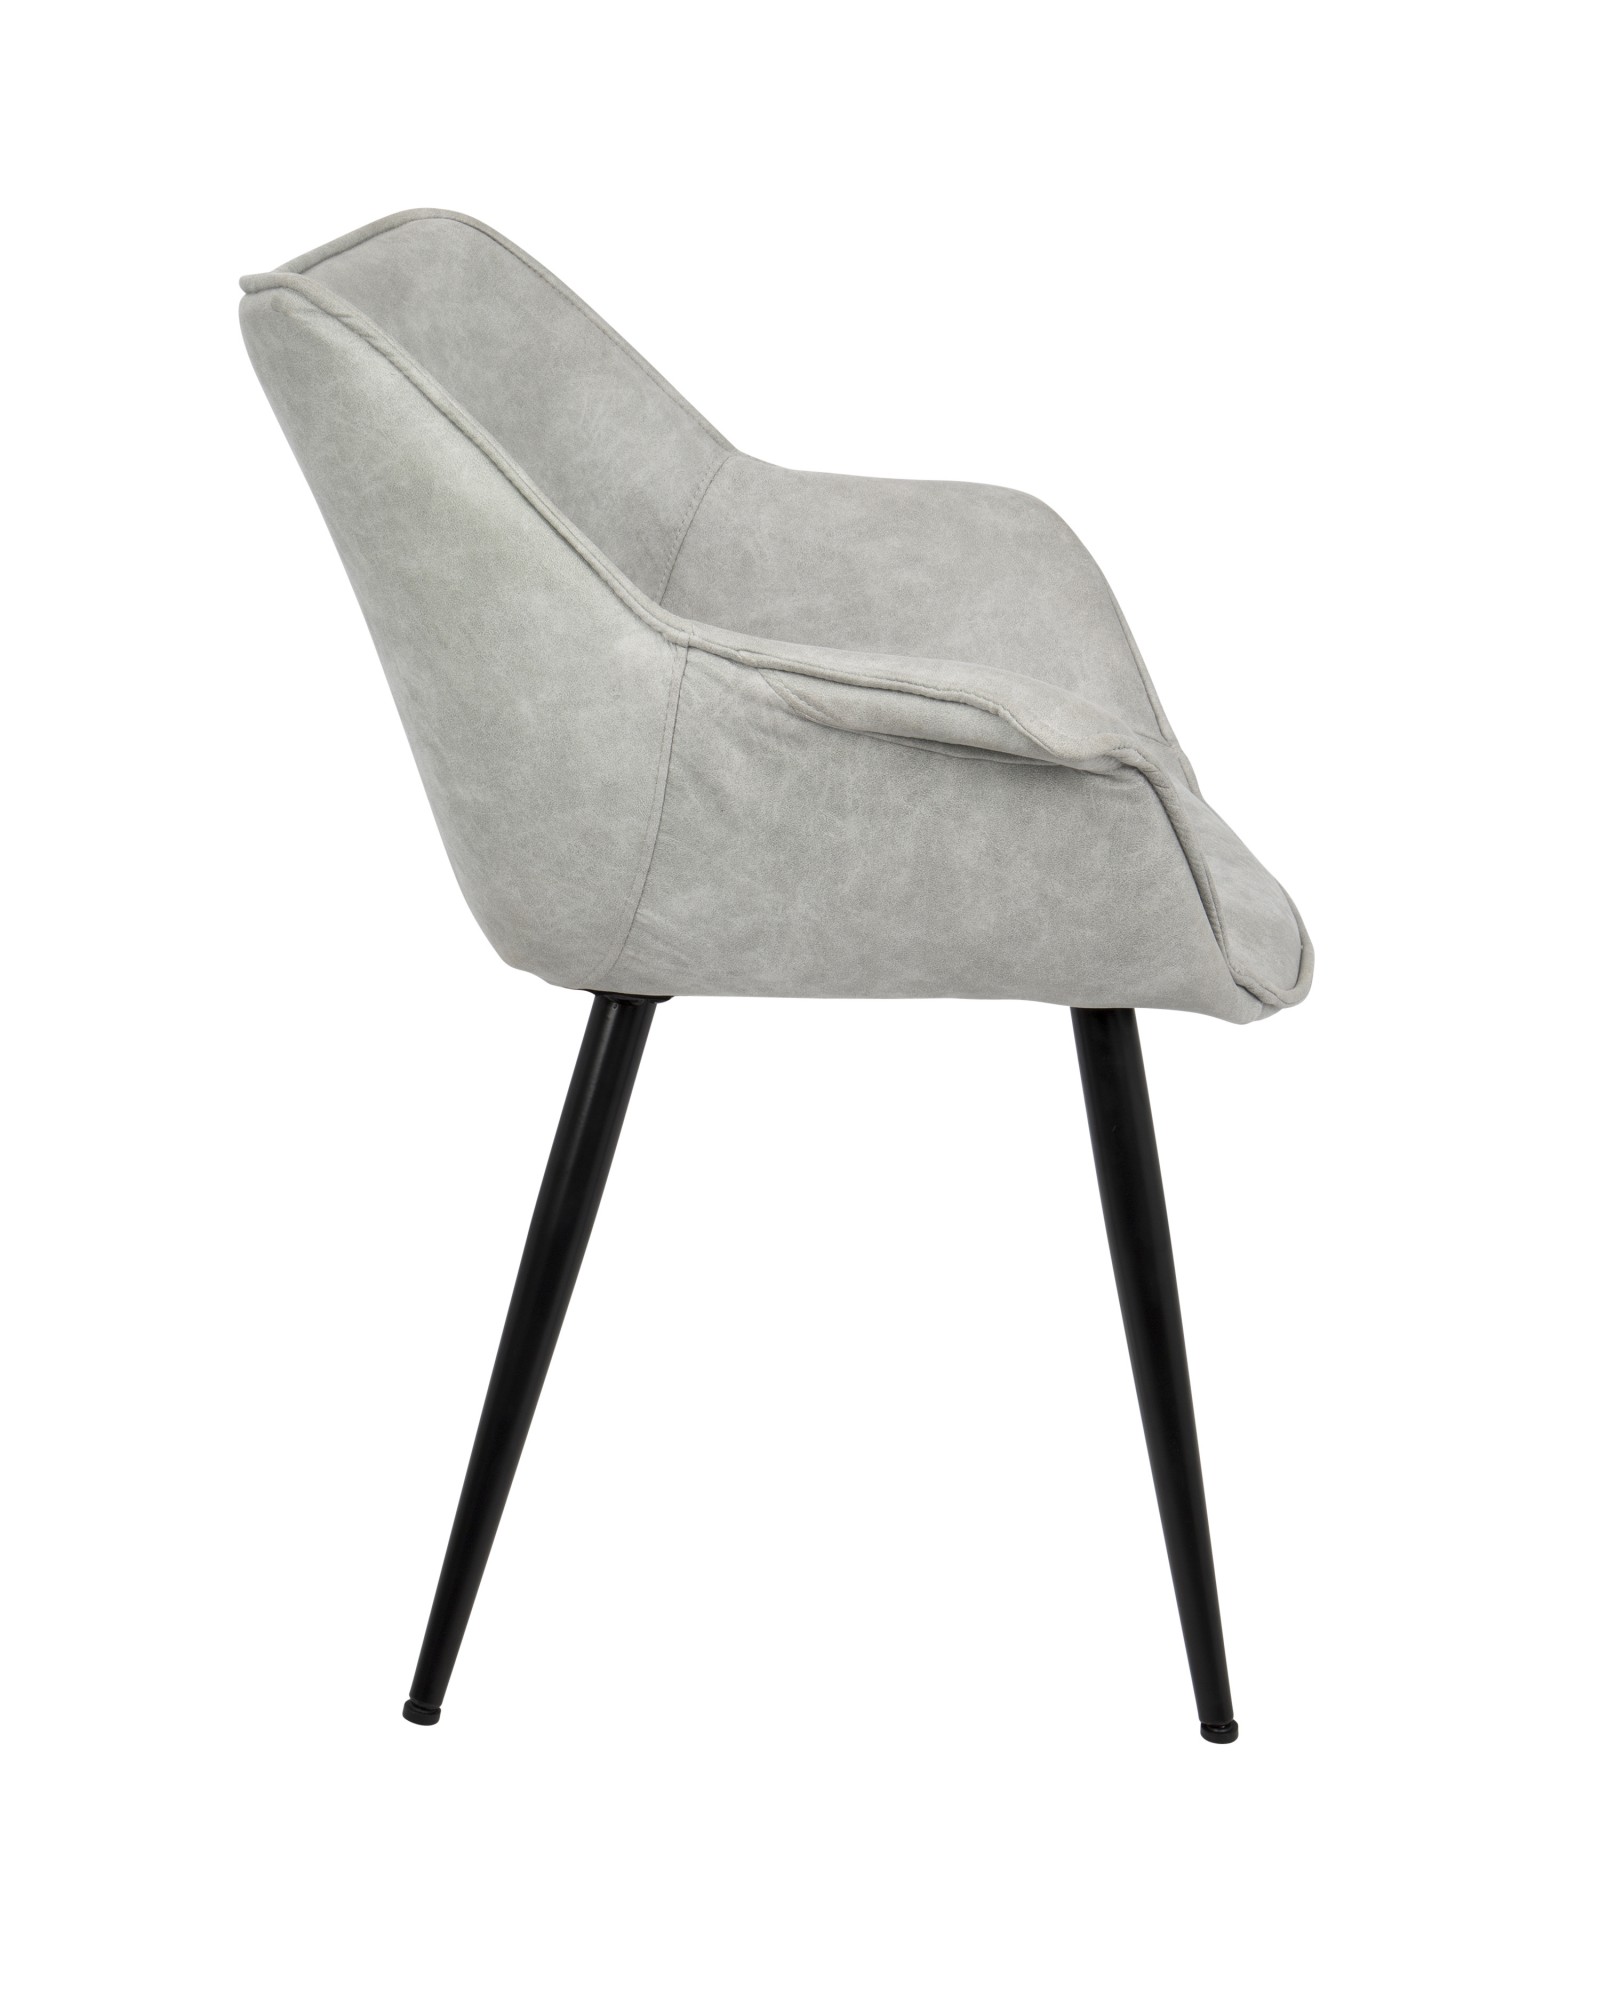 Wrangler Contemporary Accent Chair in Light Grey - Set of 2